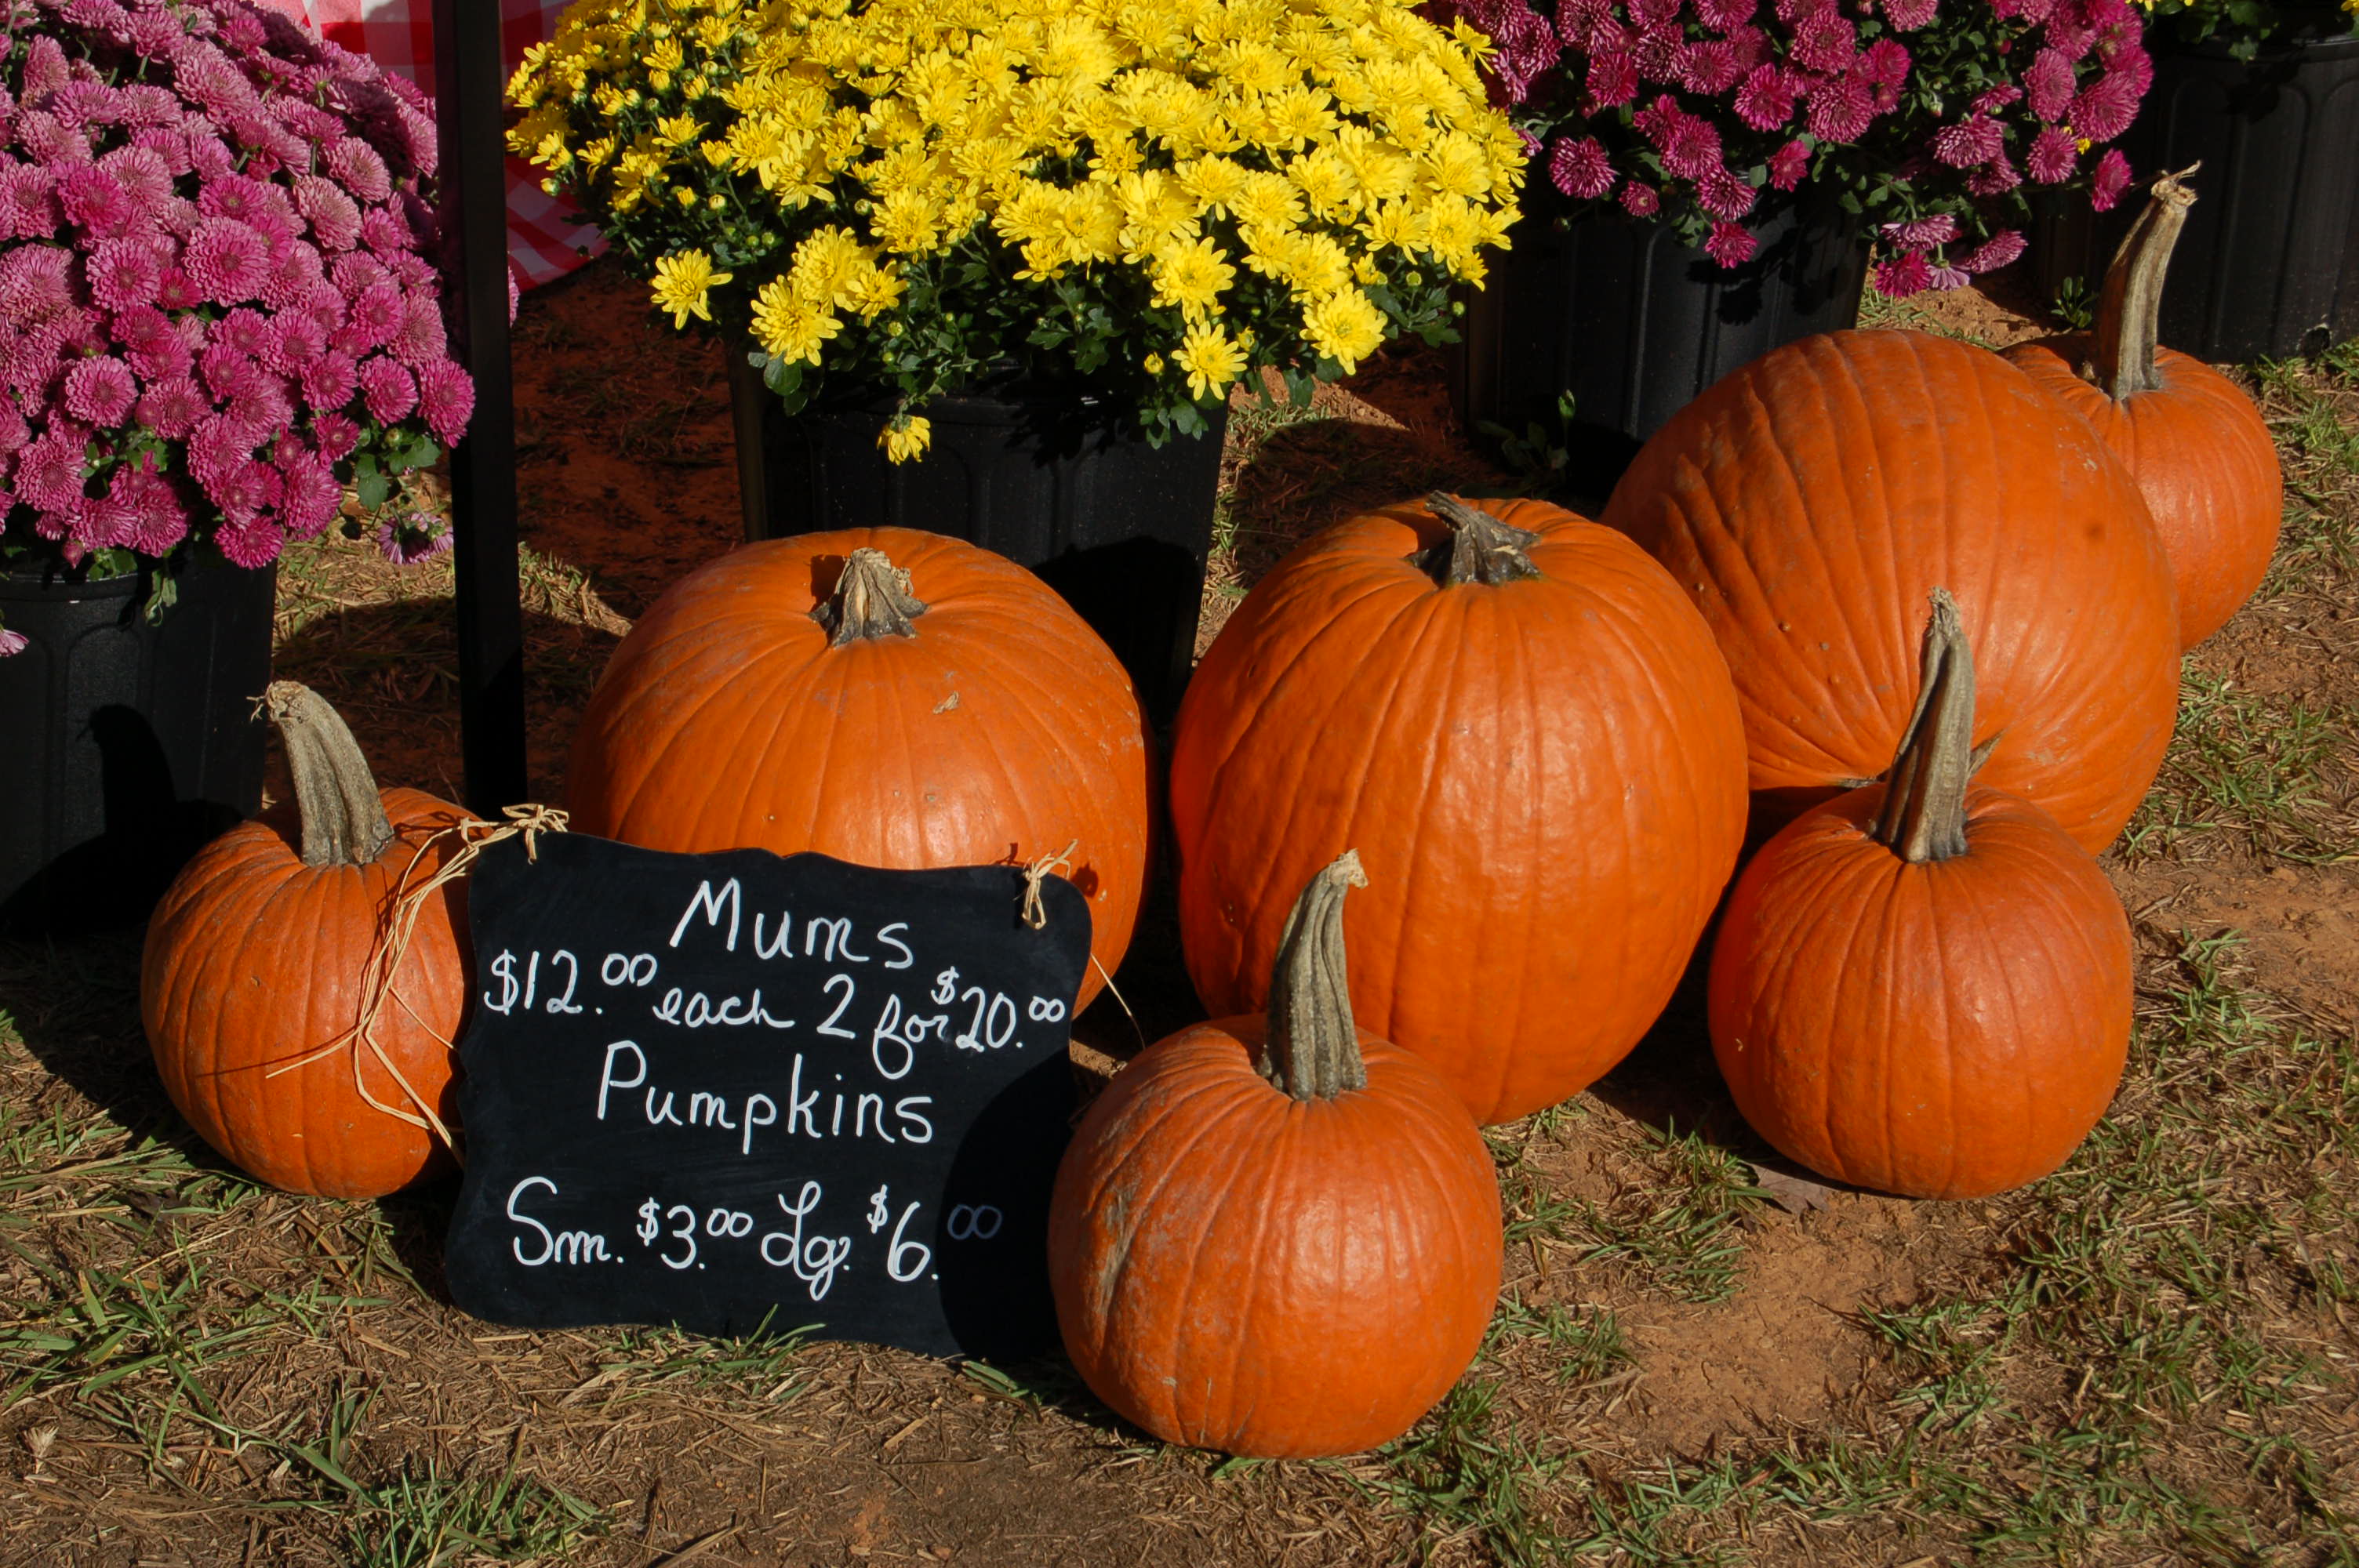 Local festivals abound during October in Trussville, Clay and Pinson